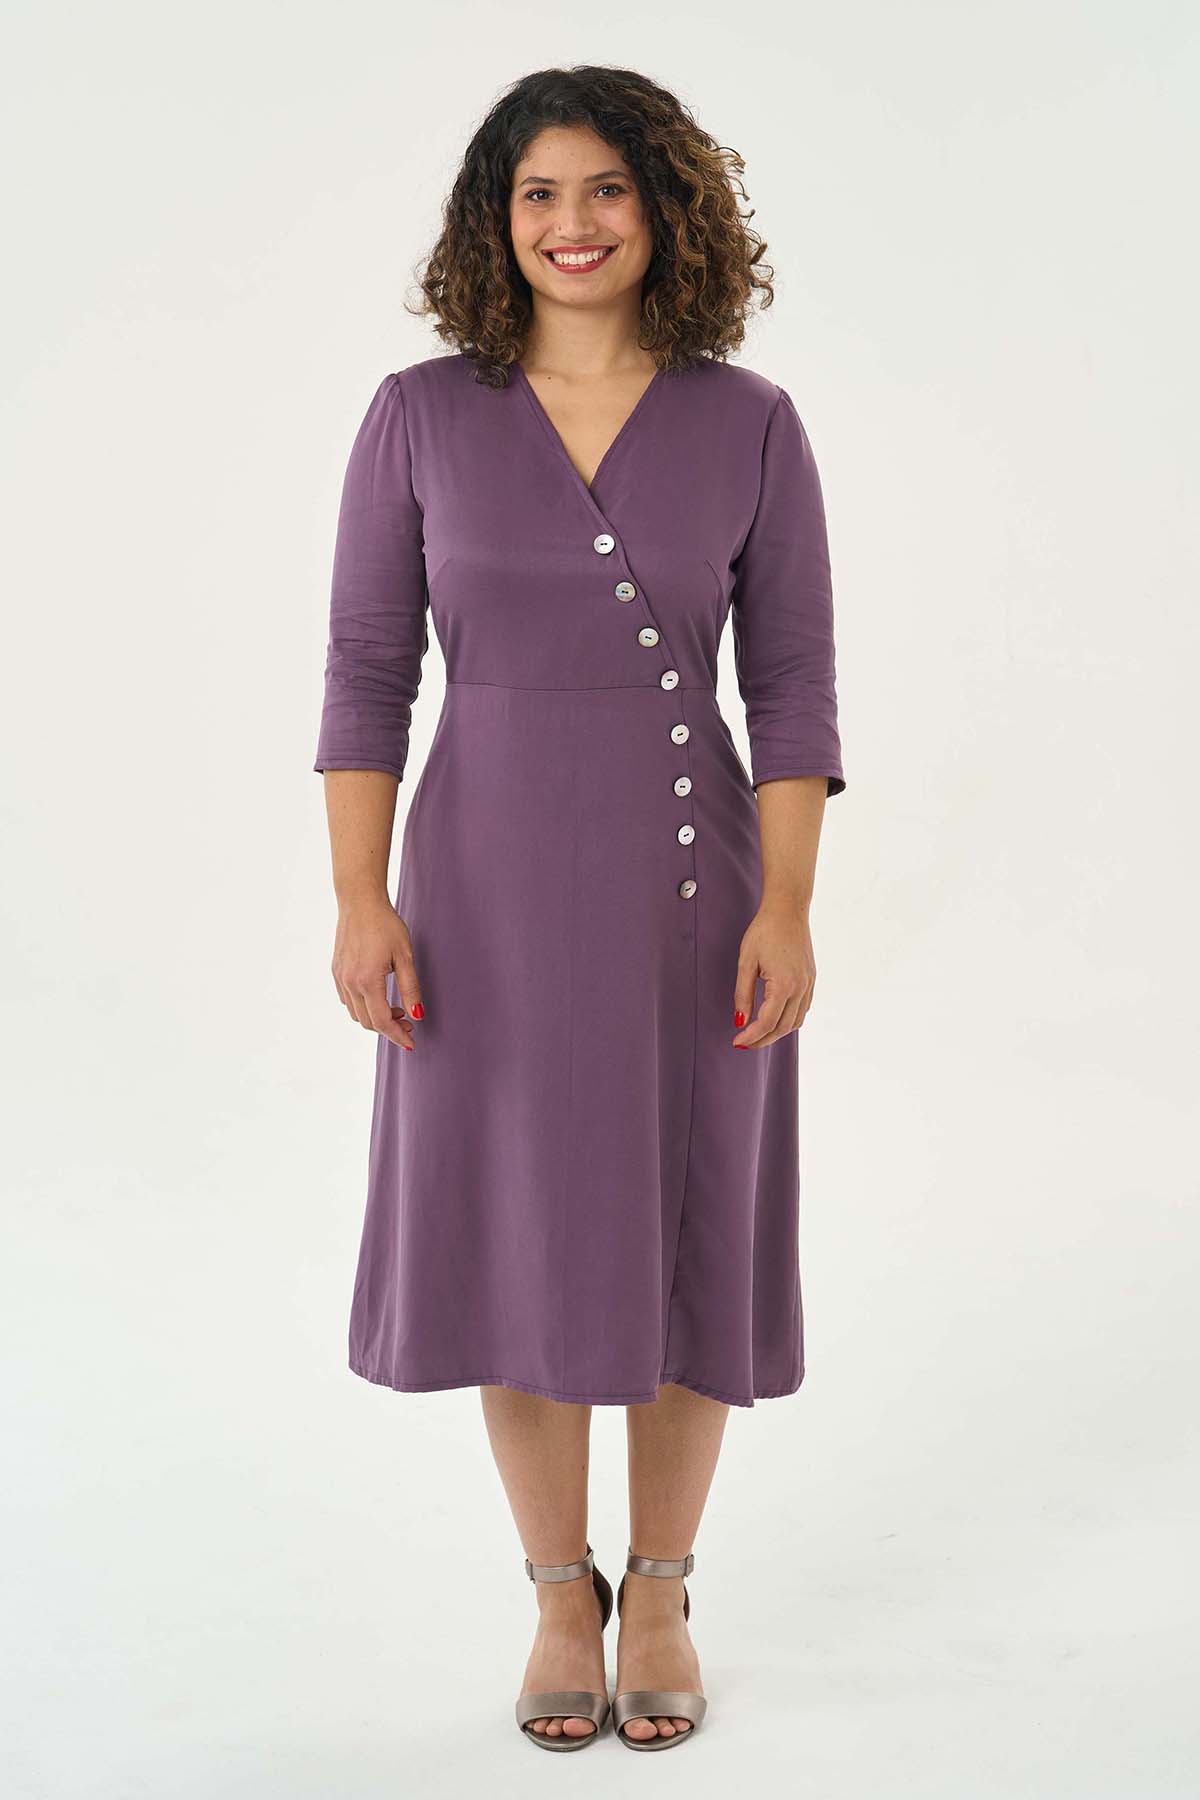 Woman wearing the Pippa Dress sewing pattern from Sew Over It on The Fold Line. A dress pattern made in rayon, viscose and crepe fabrics, featuring a front asymmetrical line of buttons, bust darts, back bodice waist darts, side invisible zip closure, V-neckline, ¾ length sleeves, and midi length.